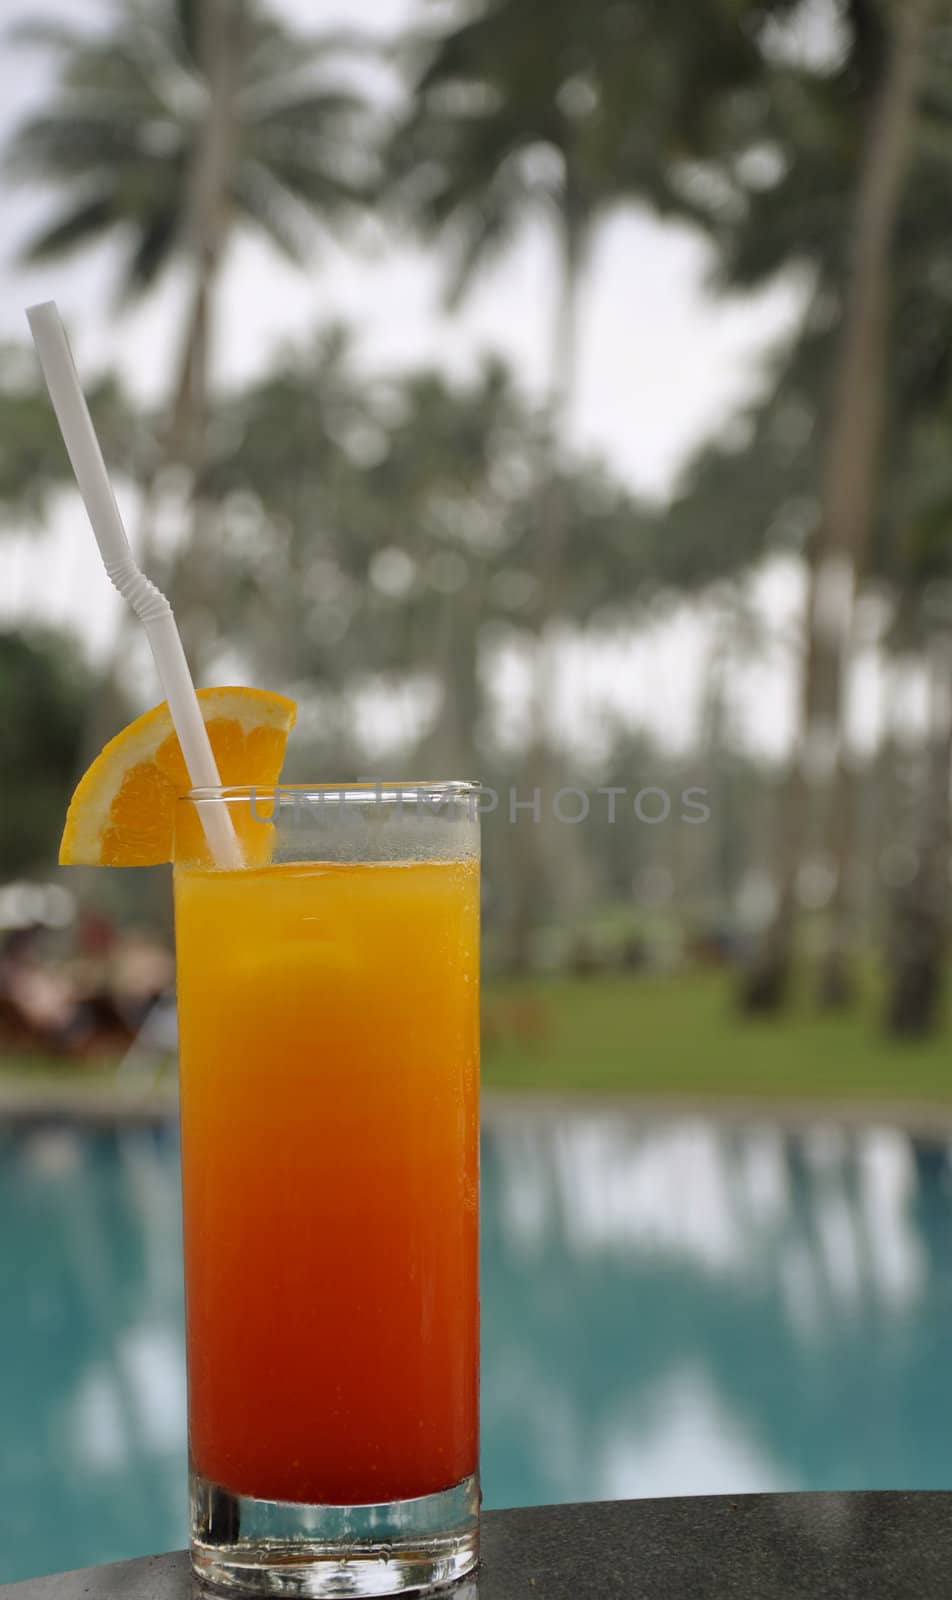 A Glass of Tequila Sunrise by a Pool by kdreams02